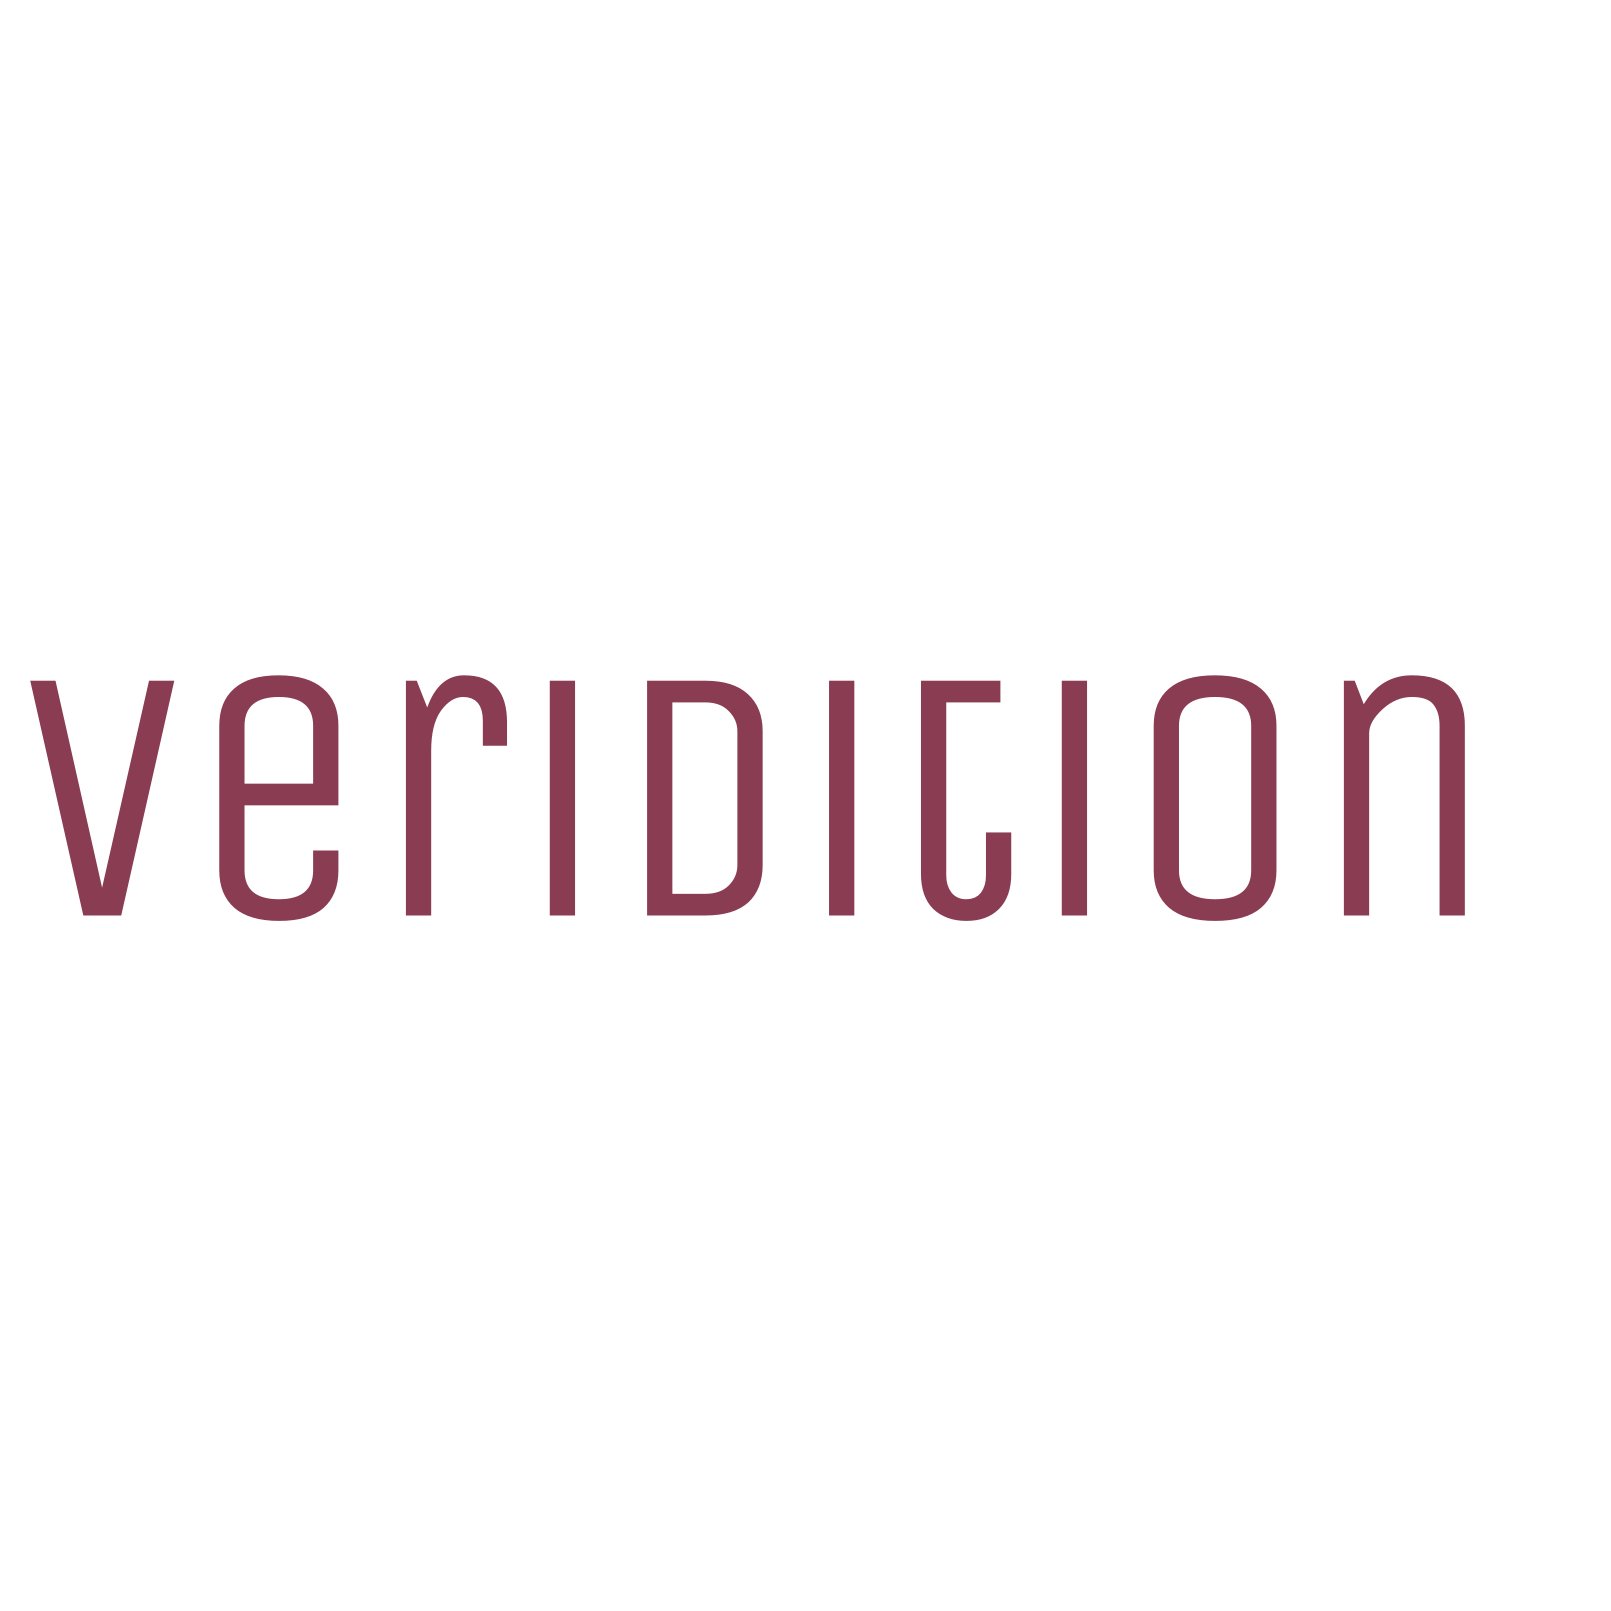 Based in Arizona, Veridition is a leader in direct sourcing for technical, operational and executive-level talent in an assortment of industries nationwide.